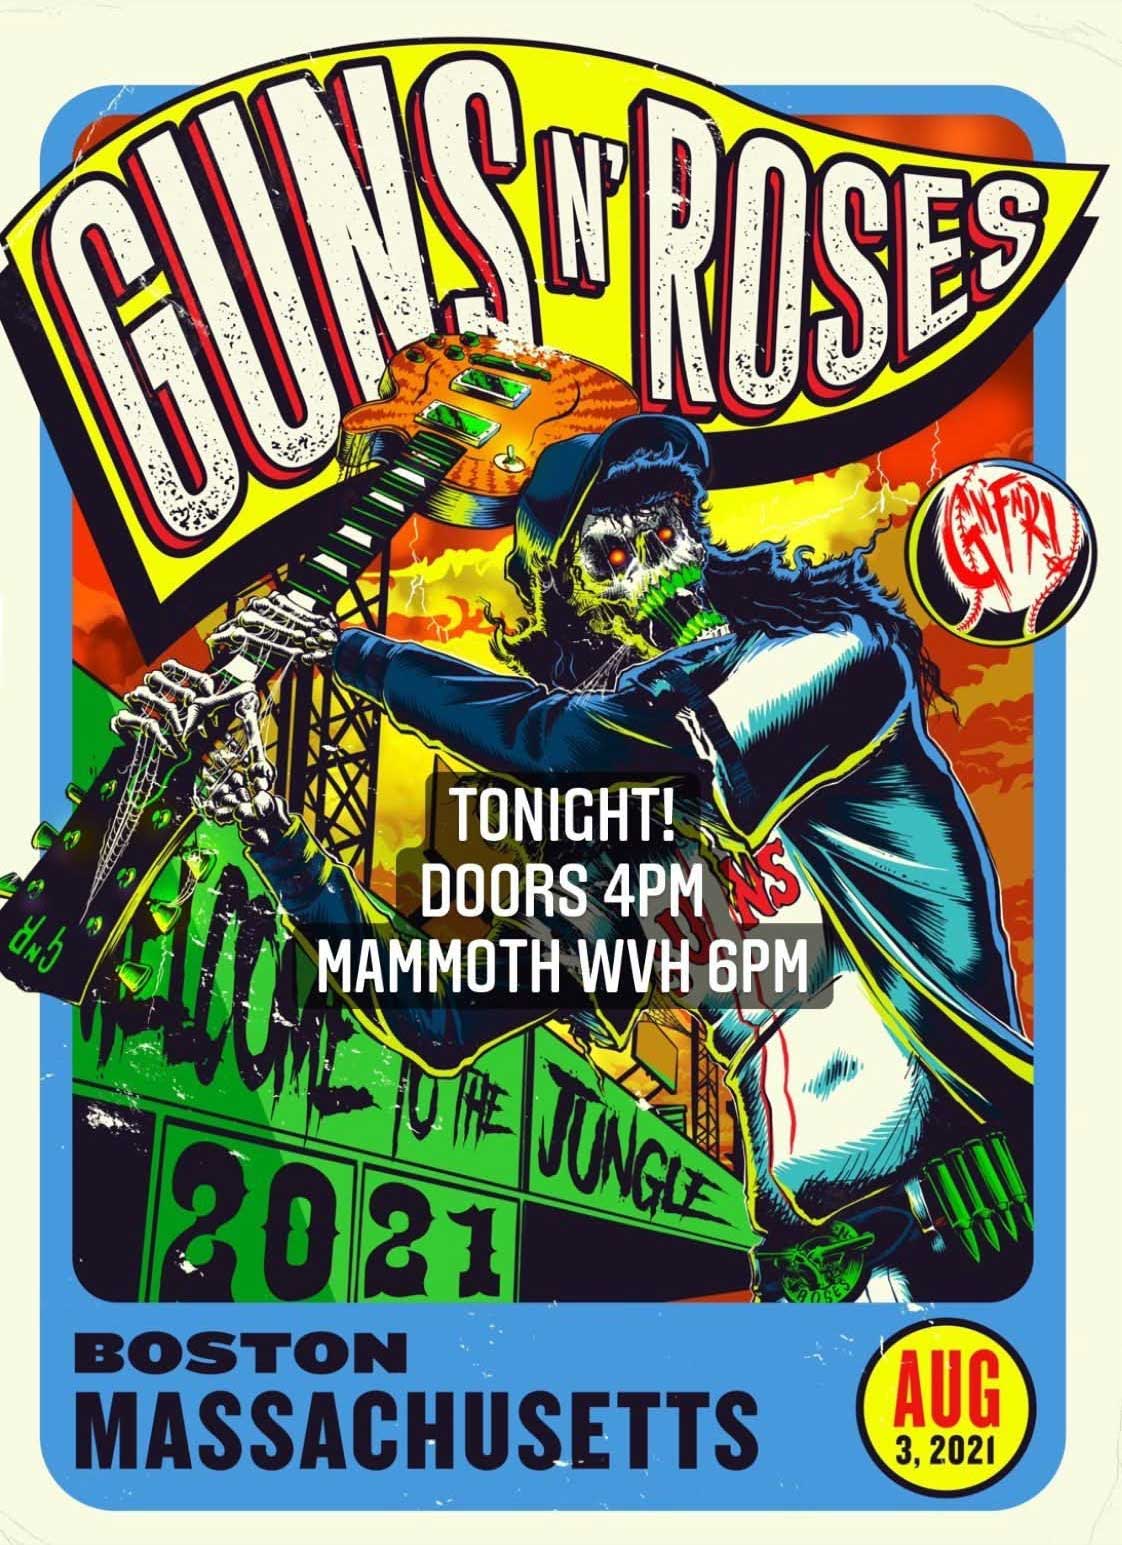 Guns n roses lithographie Boston 2021 geoff may silkworms absurd